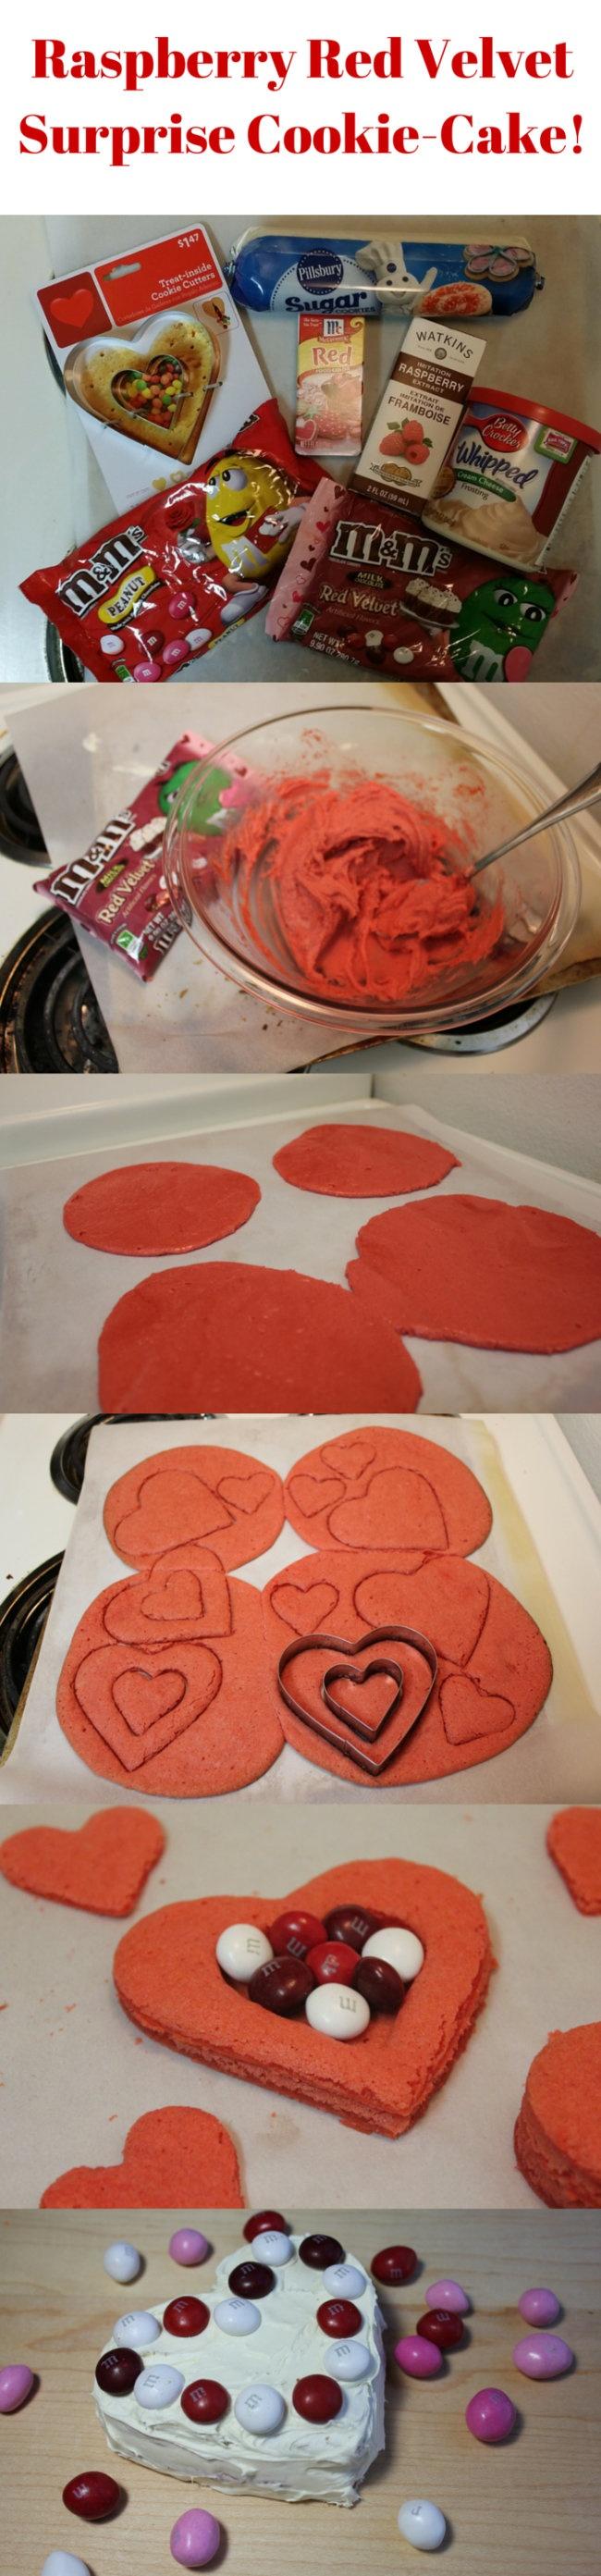 Raspberry Red Velvet M&M's® Cookie Cake Surprise recipe by @mantripping